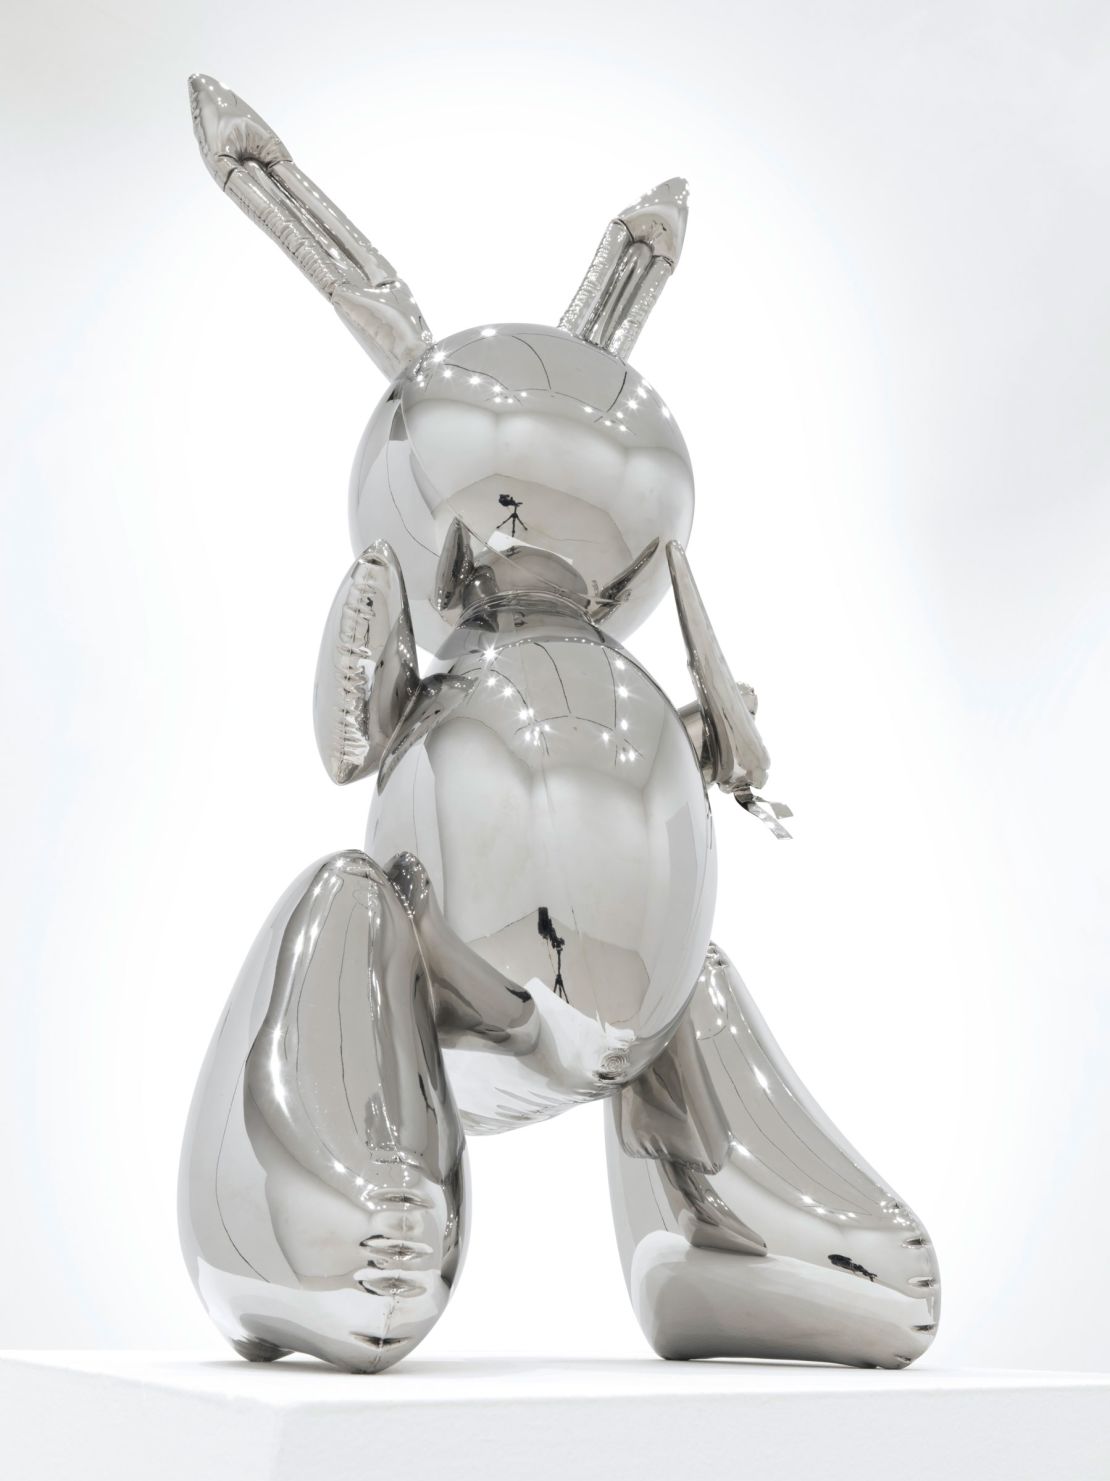 Jeff Koon's 'Rabbit' fetches a record $91 million at a New York